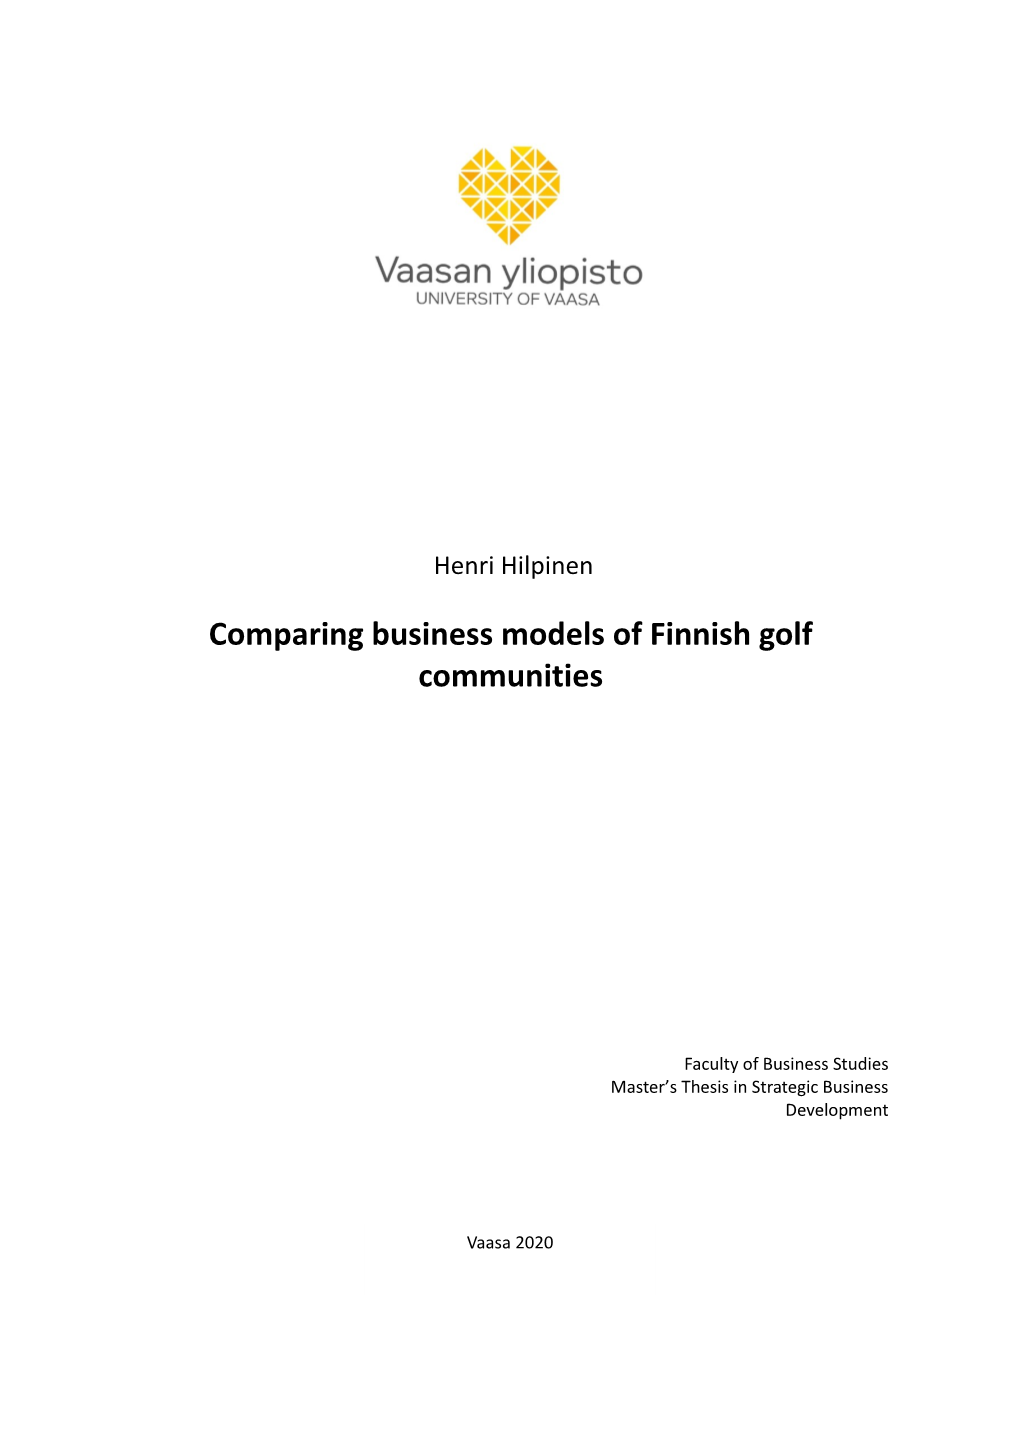 Comparing Business Models of Finnish Golf Communities